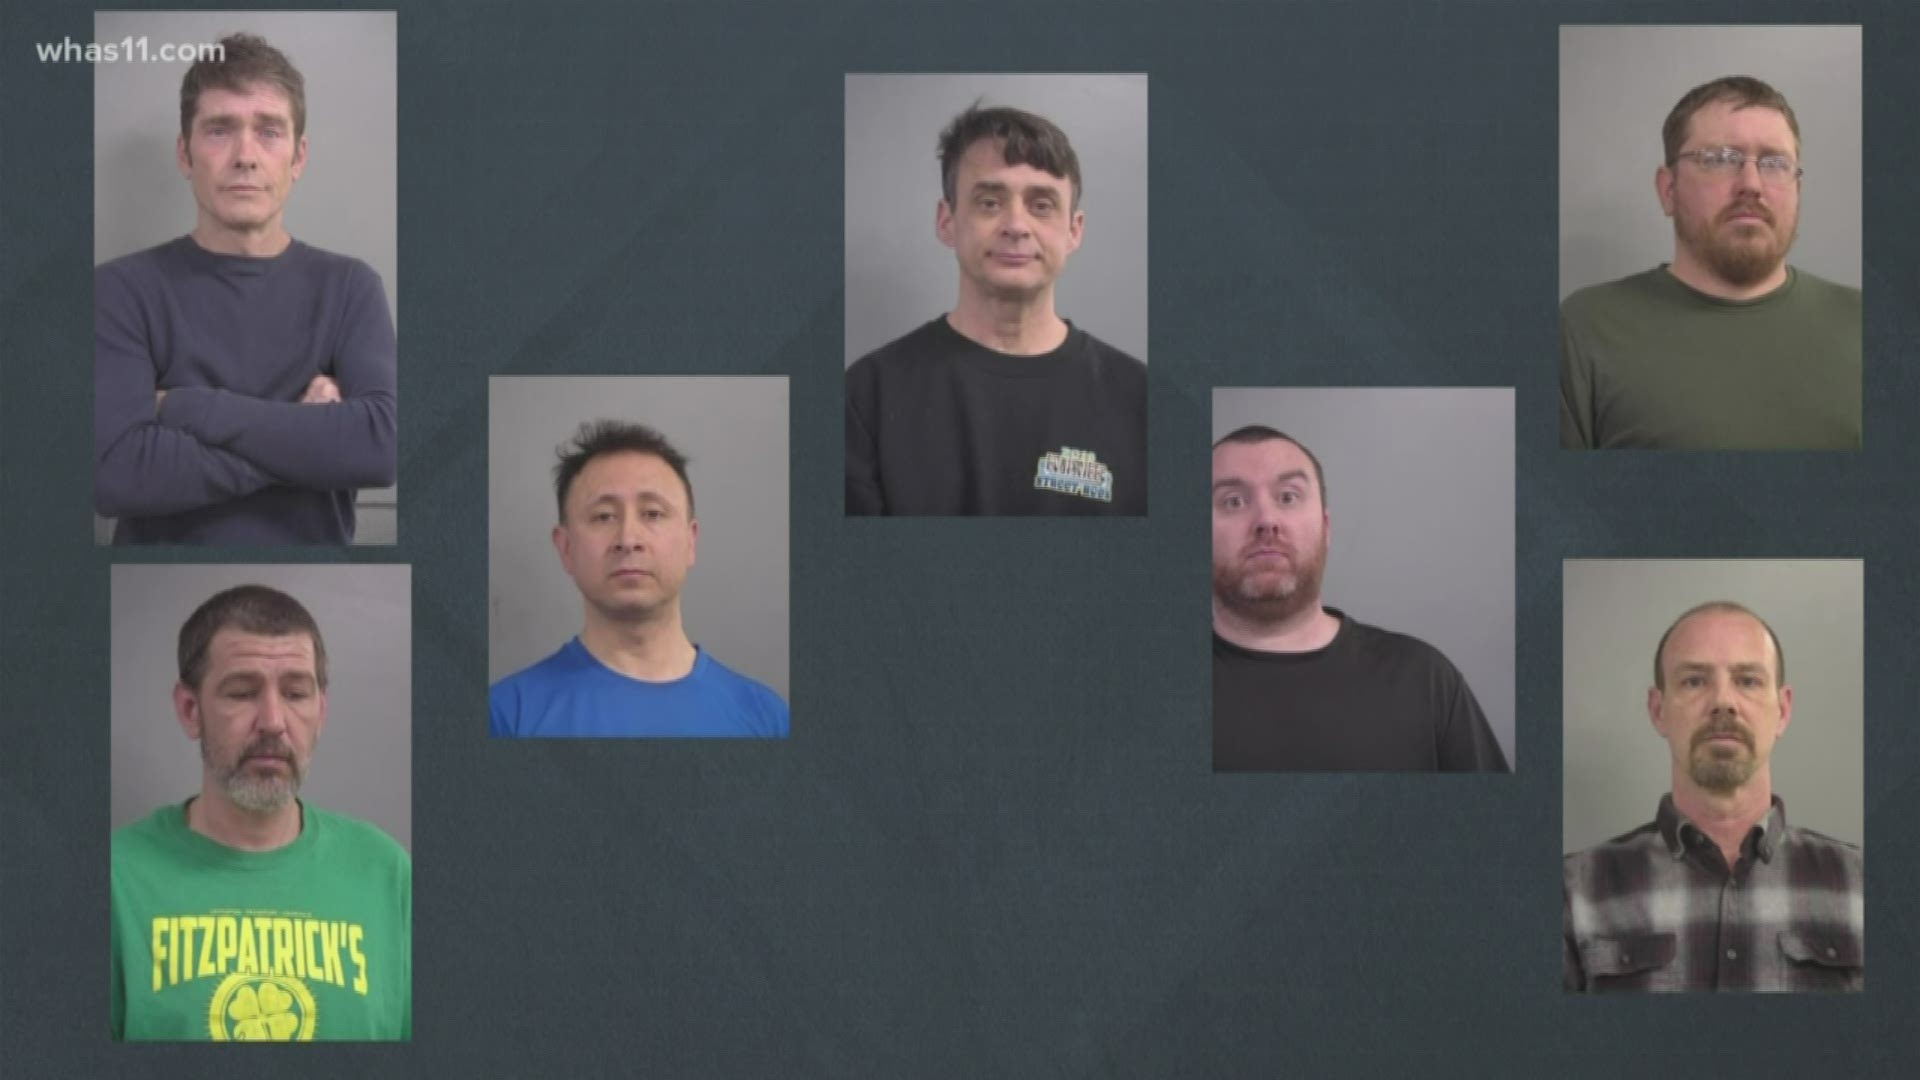 An undercover human trafficking operation has led to the arrest of seven men, according to Louisville Metro Police. Police say the men responded to fake ads online.